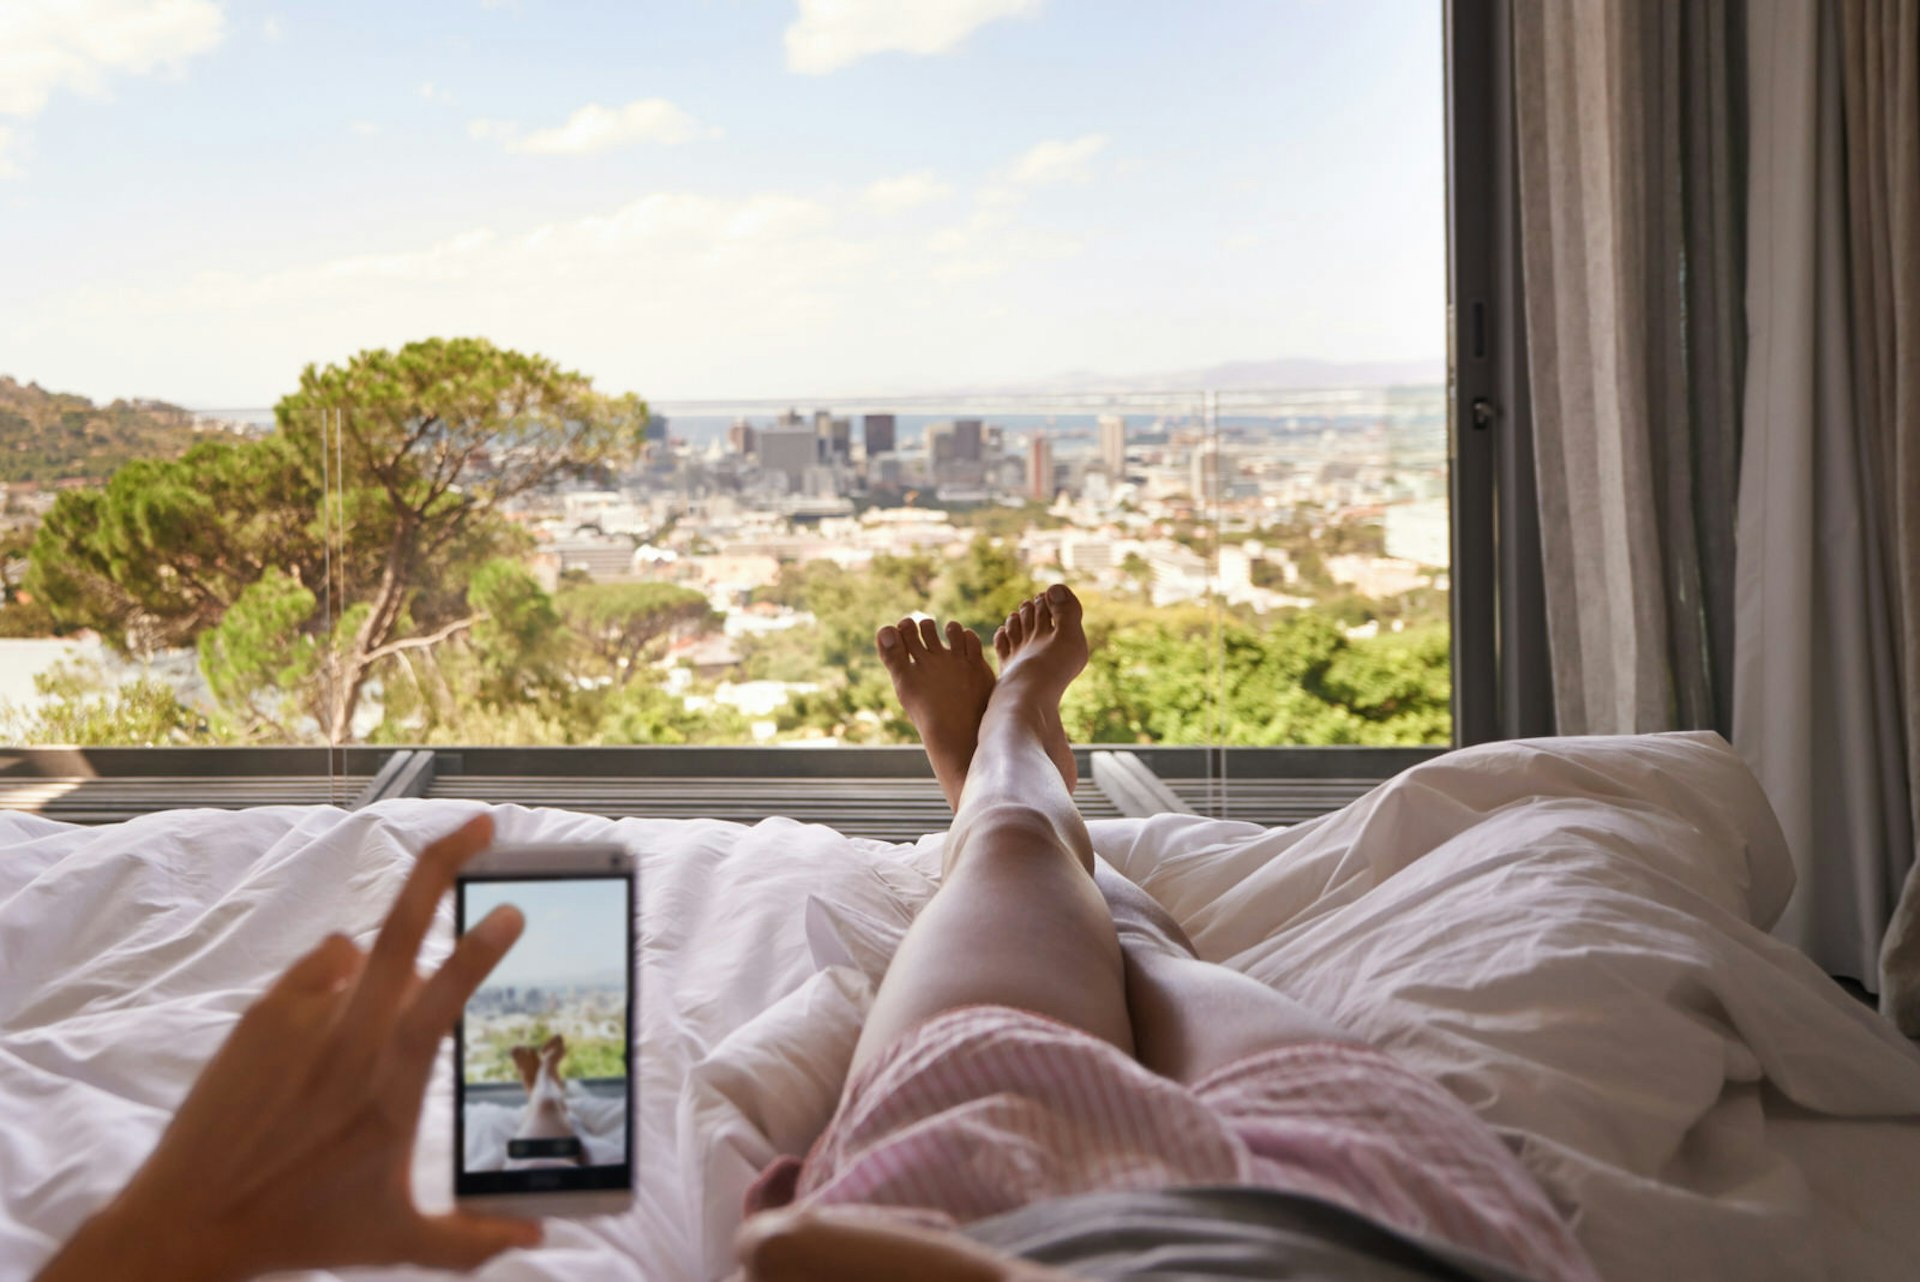 A city view from a bedroom. Person lying on the bed is taking a photo of the view - and their feet